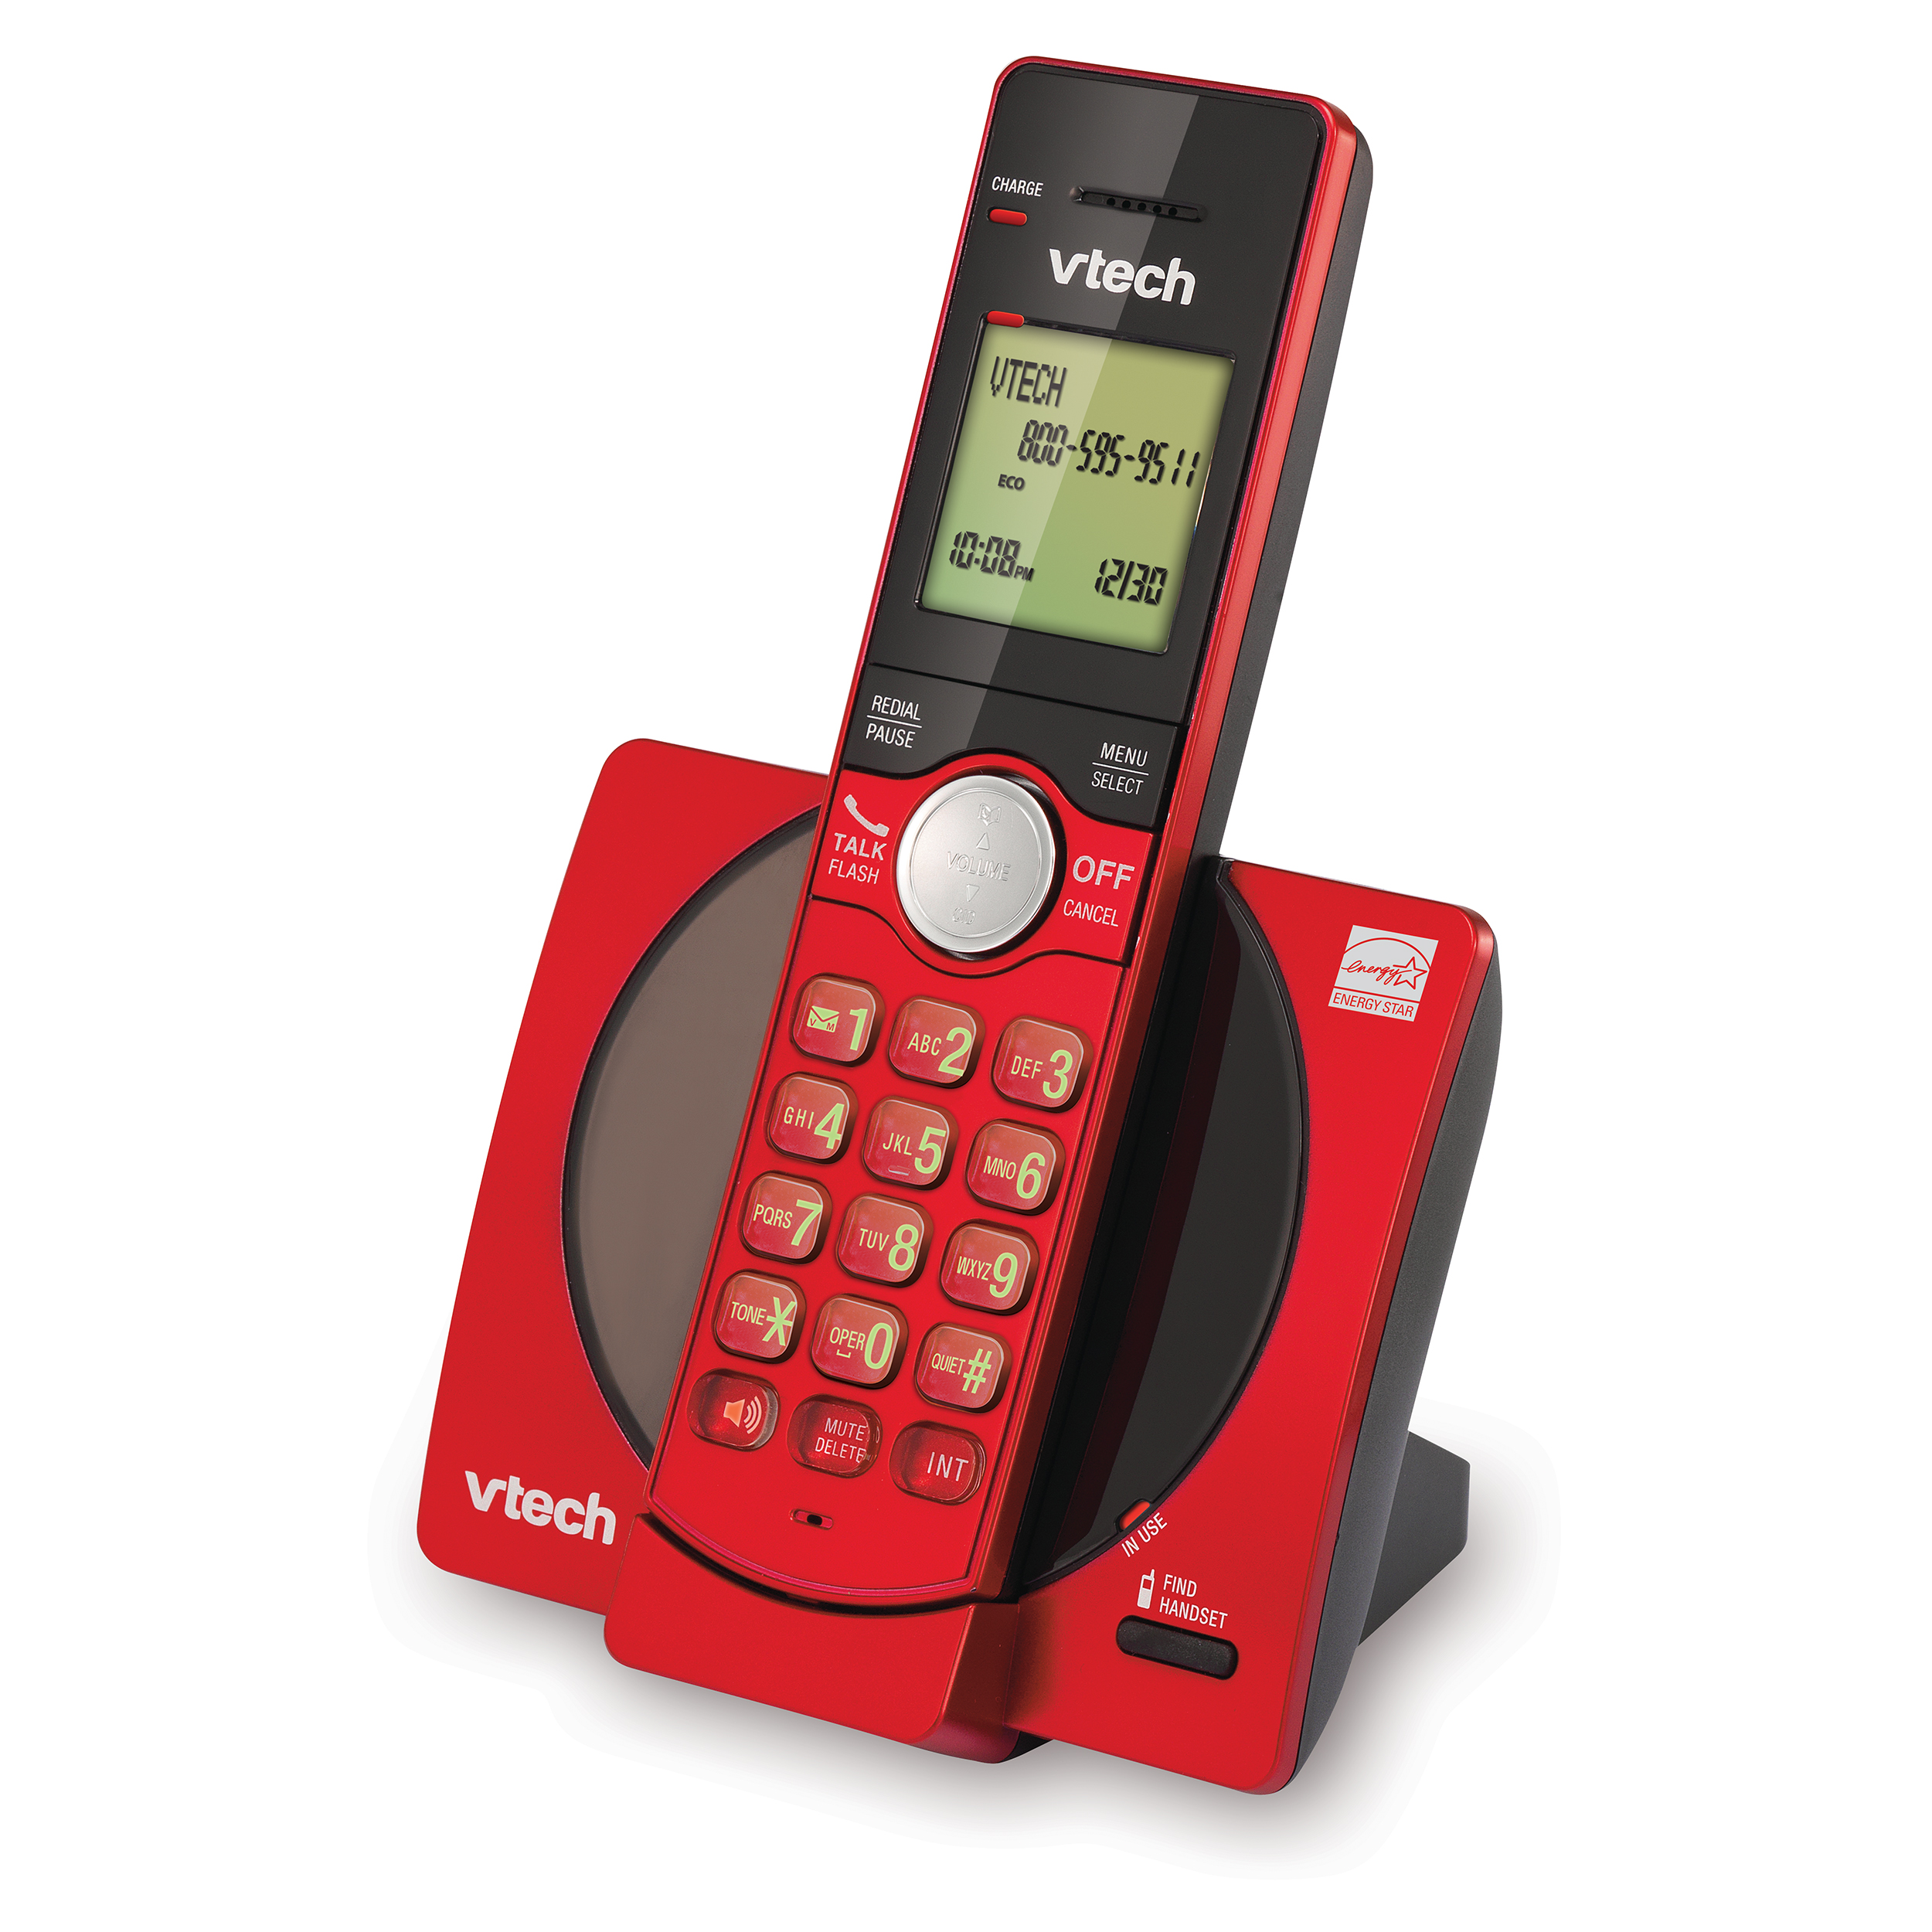 VTech CS6919-16 DECT 6.0 Cordless Phone with Caller ID and Handset Speakerphone, Red - image 3 of 3